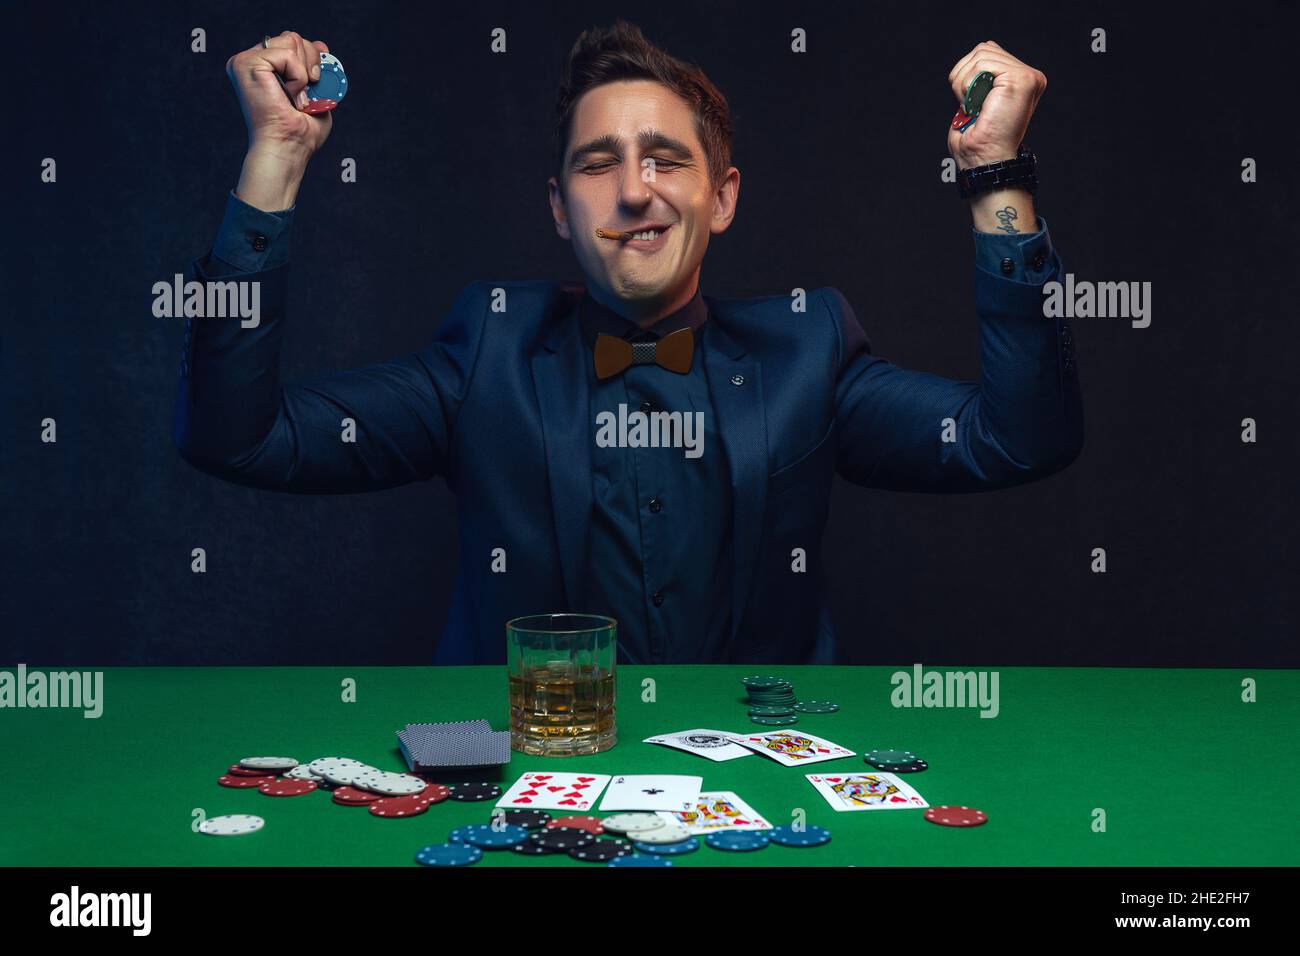 Happy poker player winning with poker cards and chips. Stock Photo